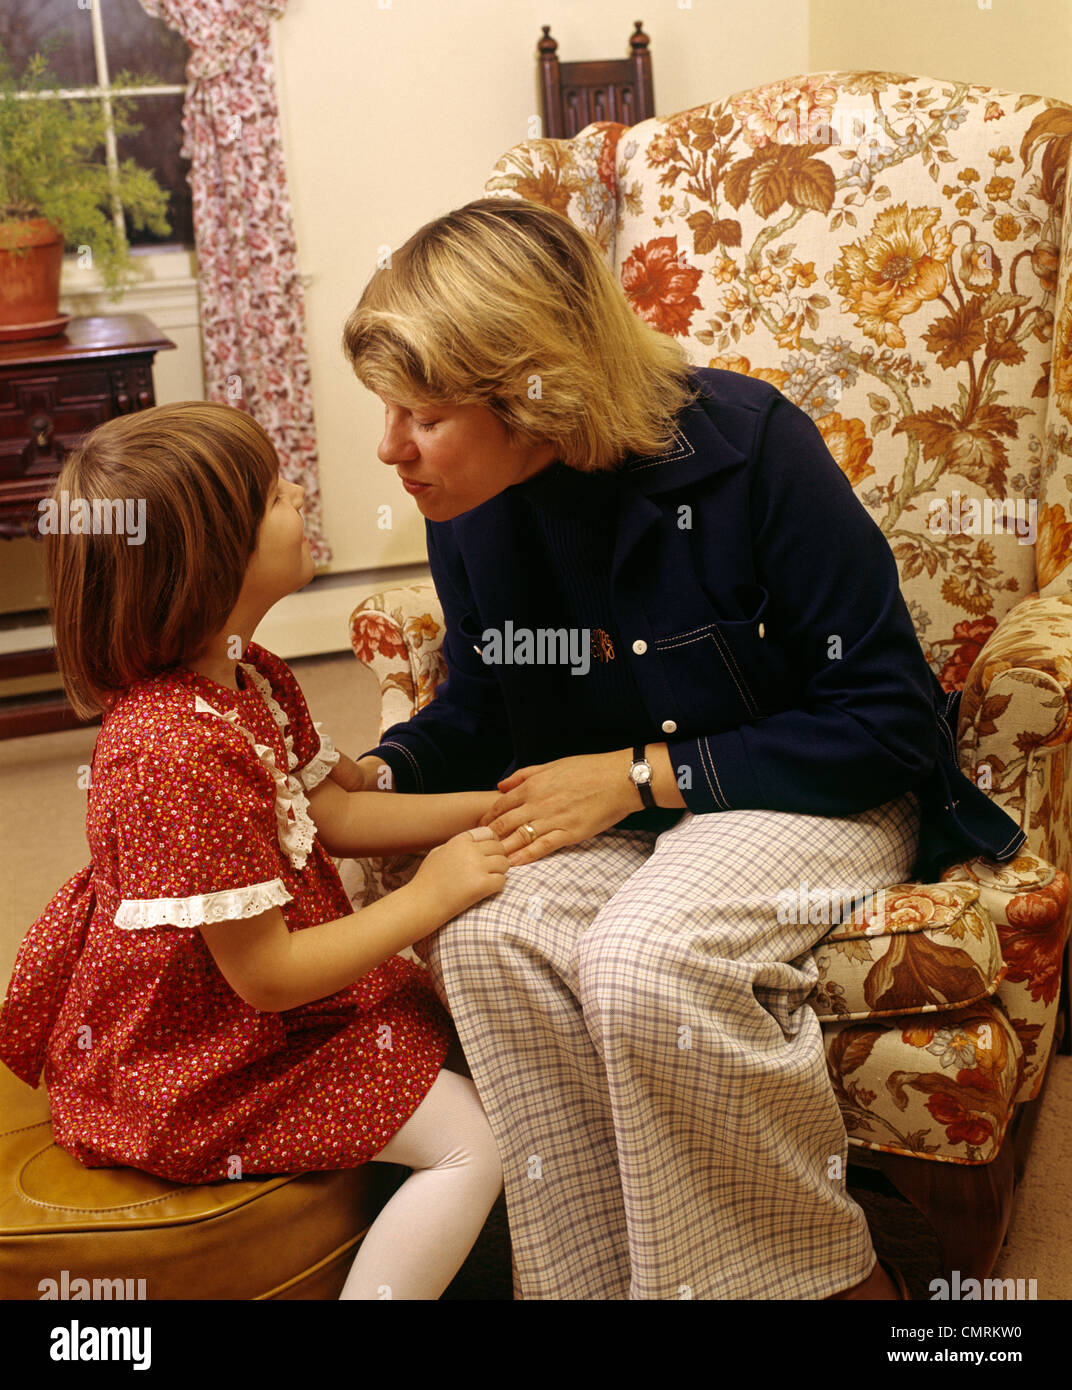 1970 1970s RETRO MOTHER SITTING IN ARMCHAIR SMILING TALKING TO DAUGHTER Stock Photo